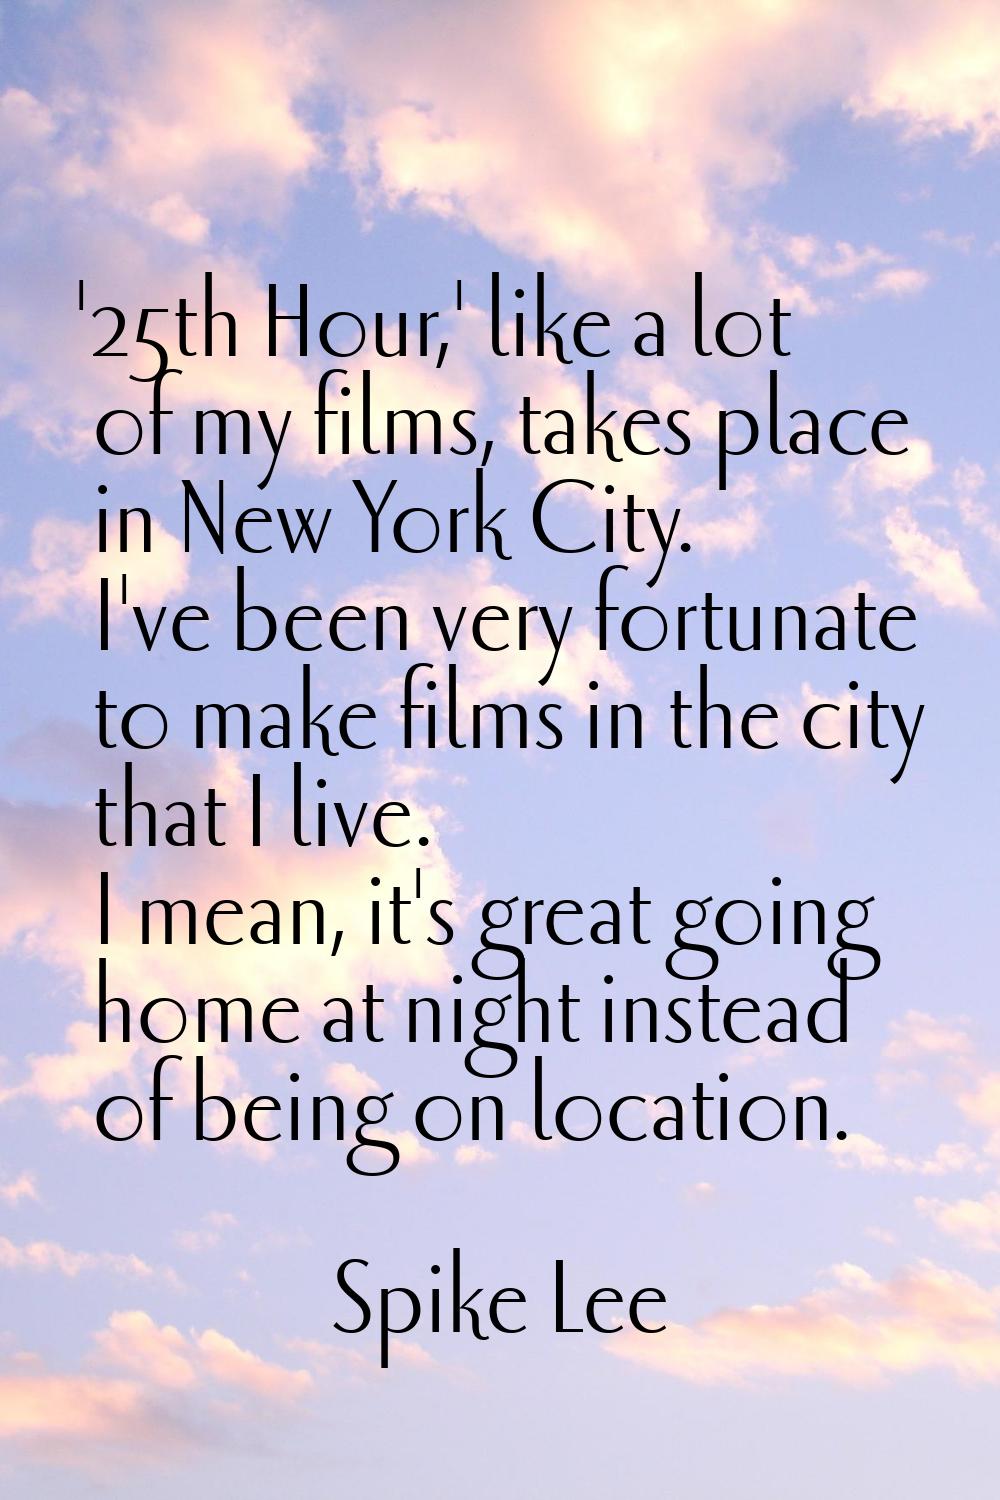 '25th Hour,' like a lot of my films, takes place in New York City. I've been very fortunate to make